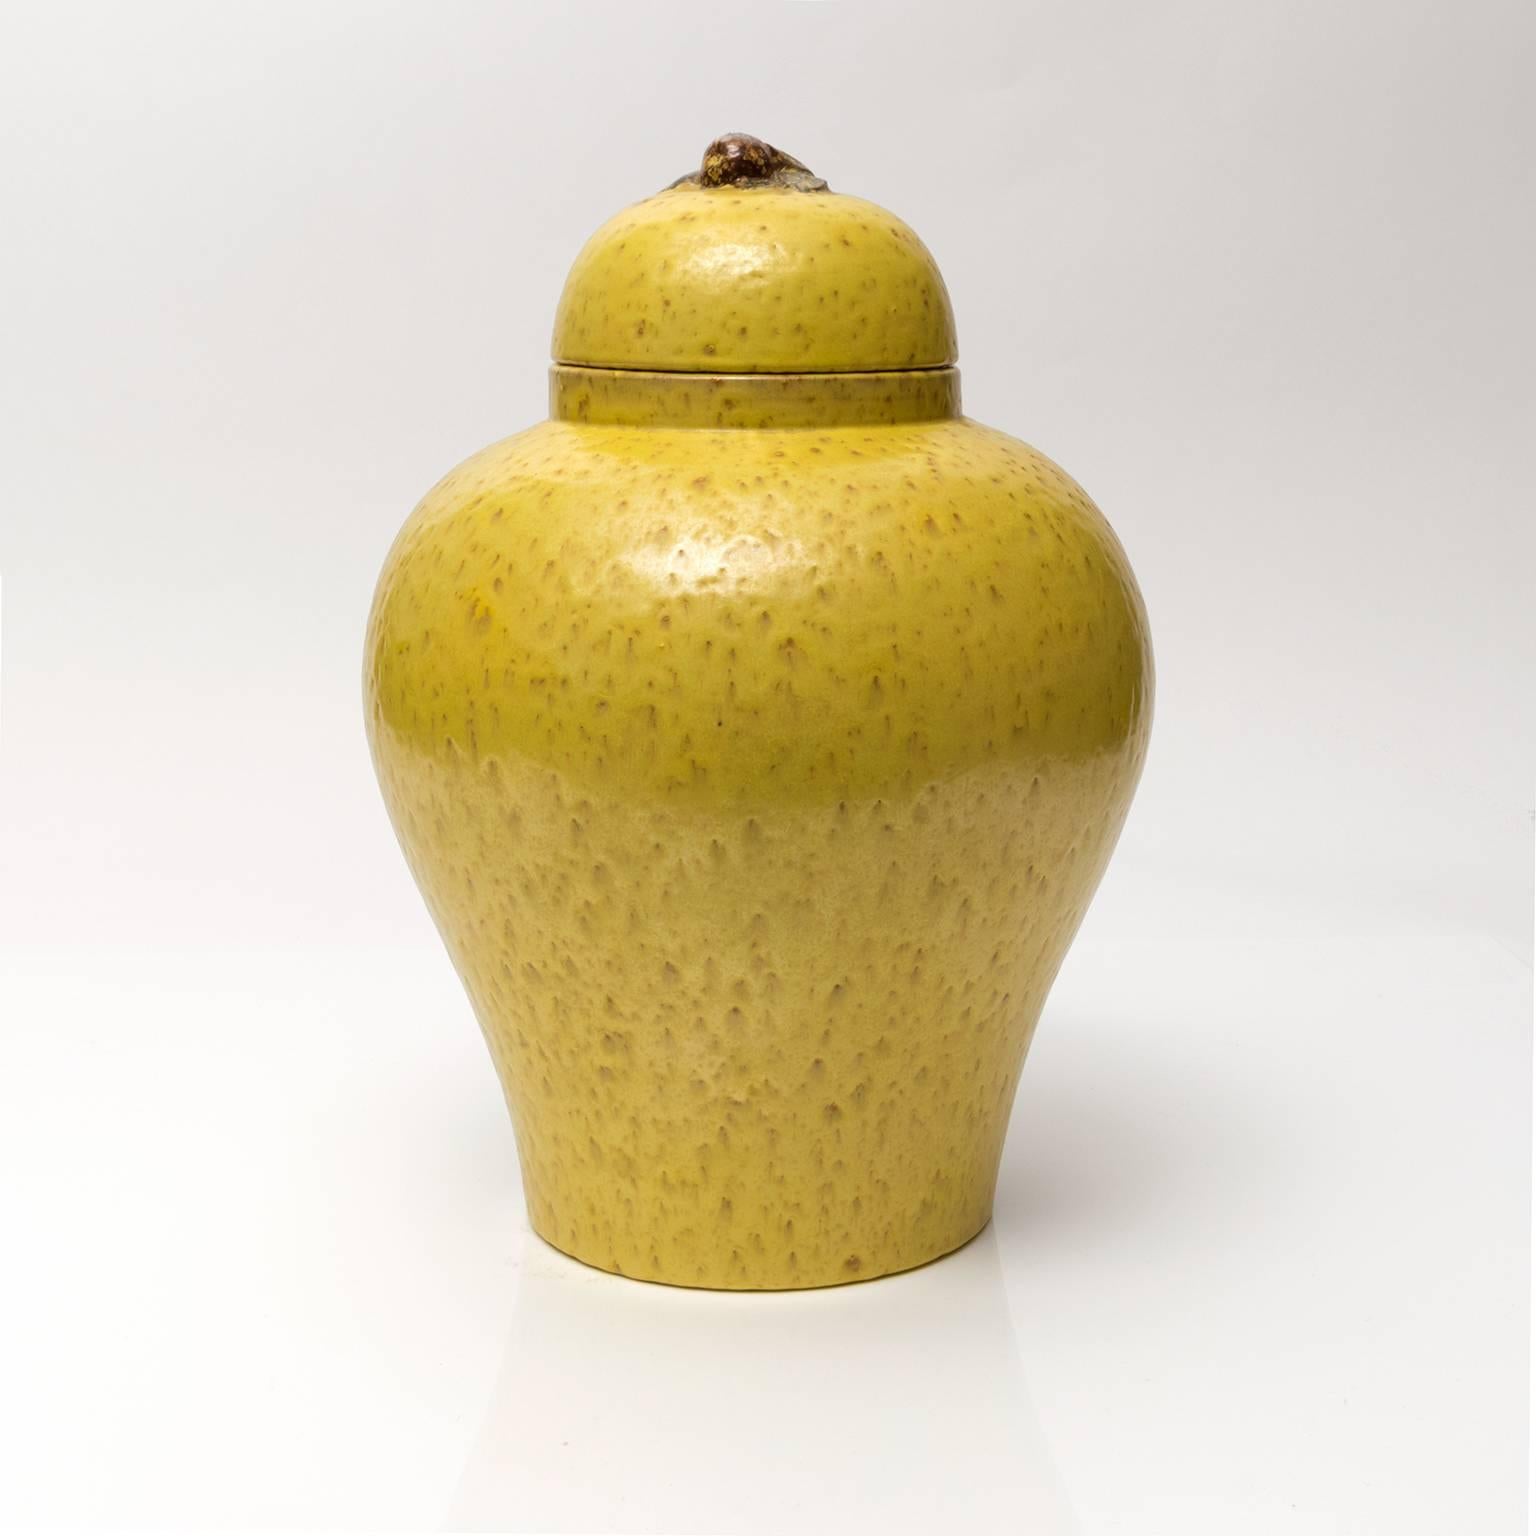 A large glazed ceramic jar with lid designed by Jerk Werkmaster for Nittsjo, Sweden, 1930s. The lid is decorated with a piece of fruit and a few leaves. Dimensions: H 7.5" x D 5", H 6" x Dimensions: H 13.5" x Diameter: 9".